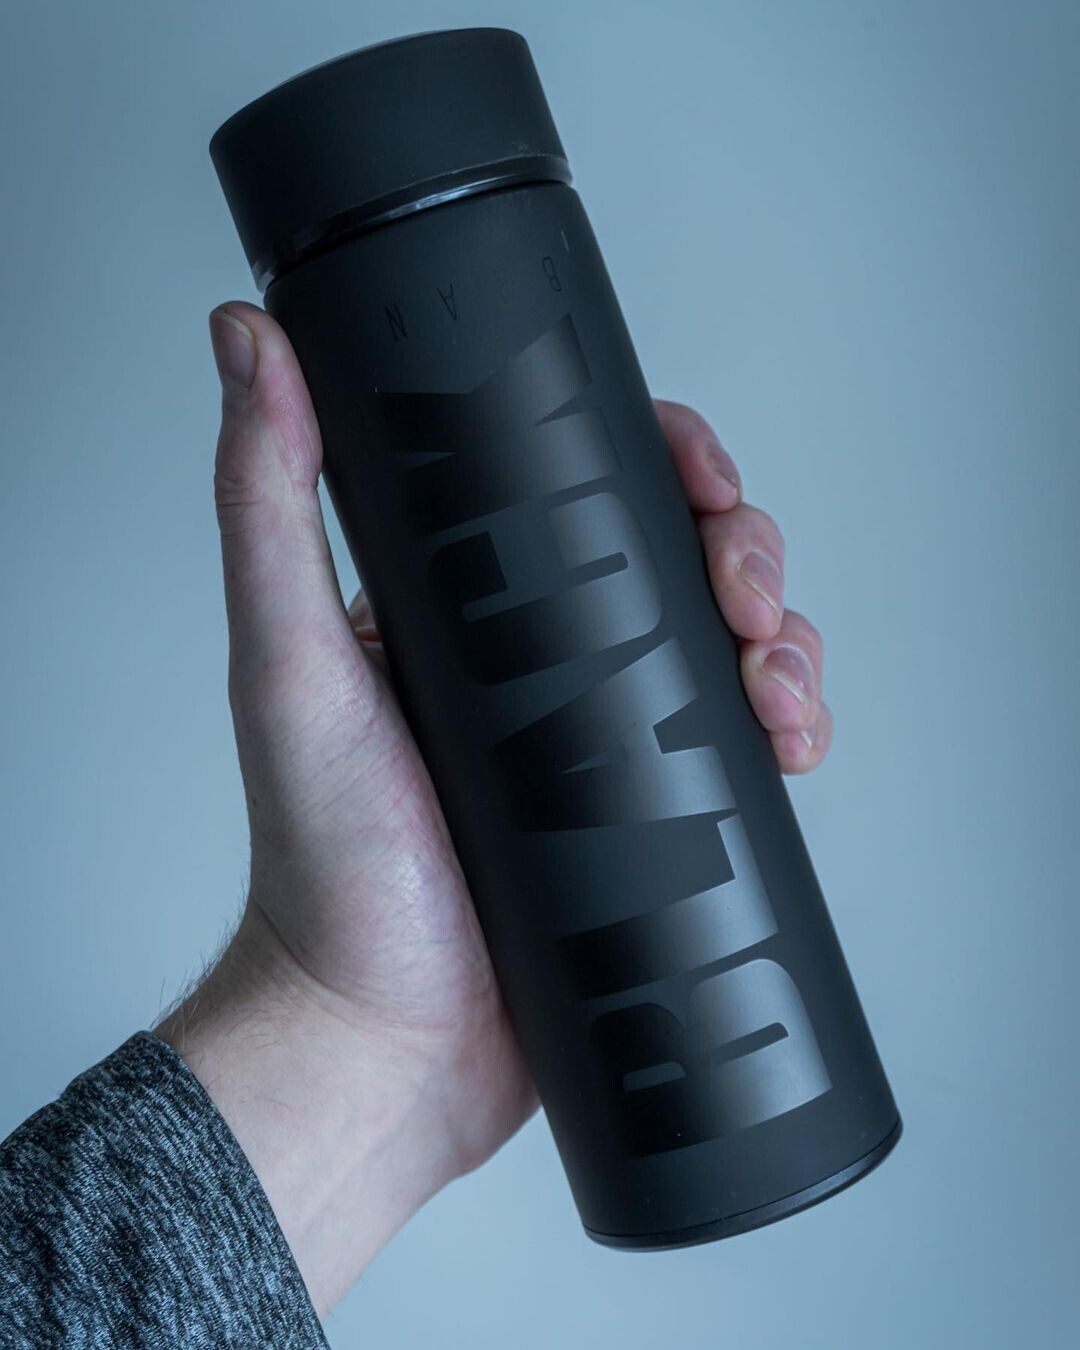 16 oz Matte Black Thermos Vacuum Insulated Flask - Keeps Hot & Cold Drinks Fresh